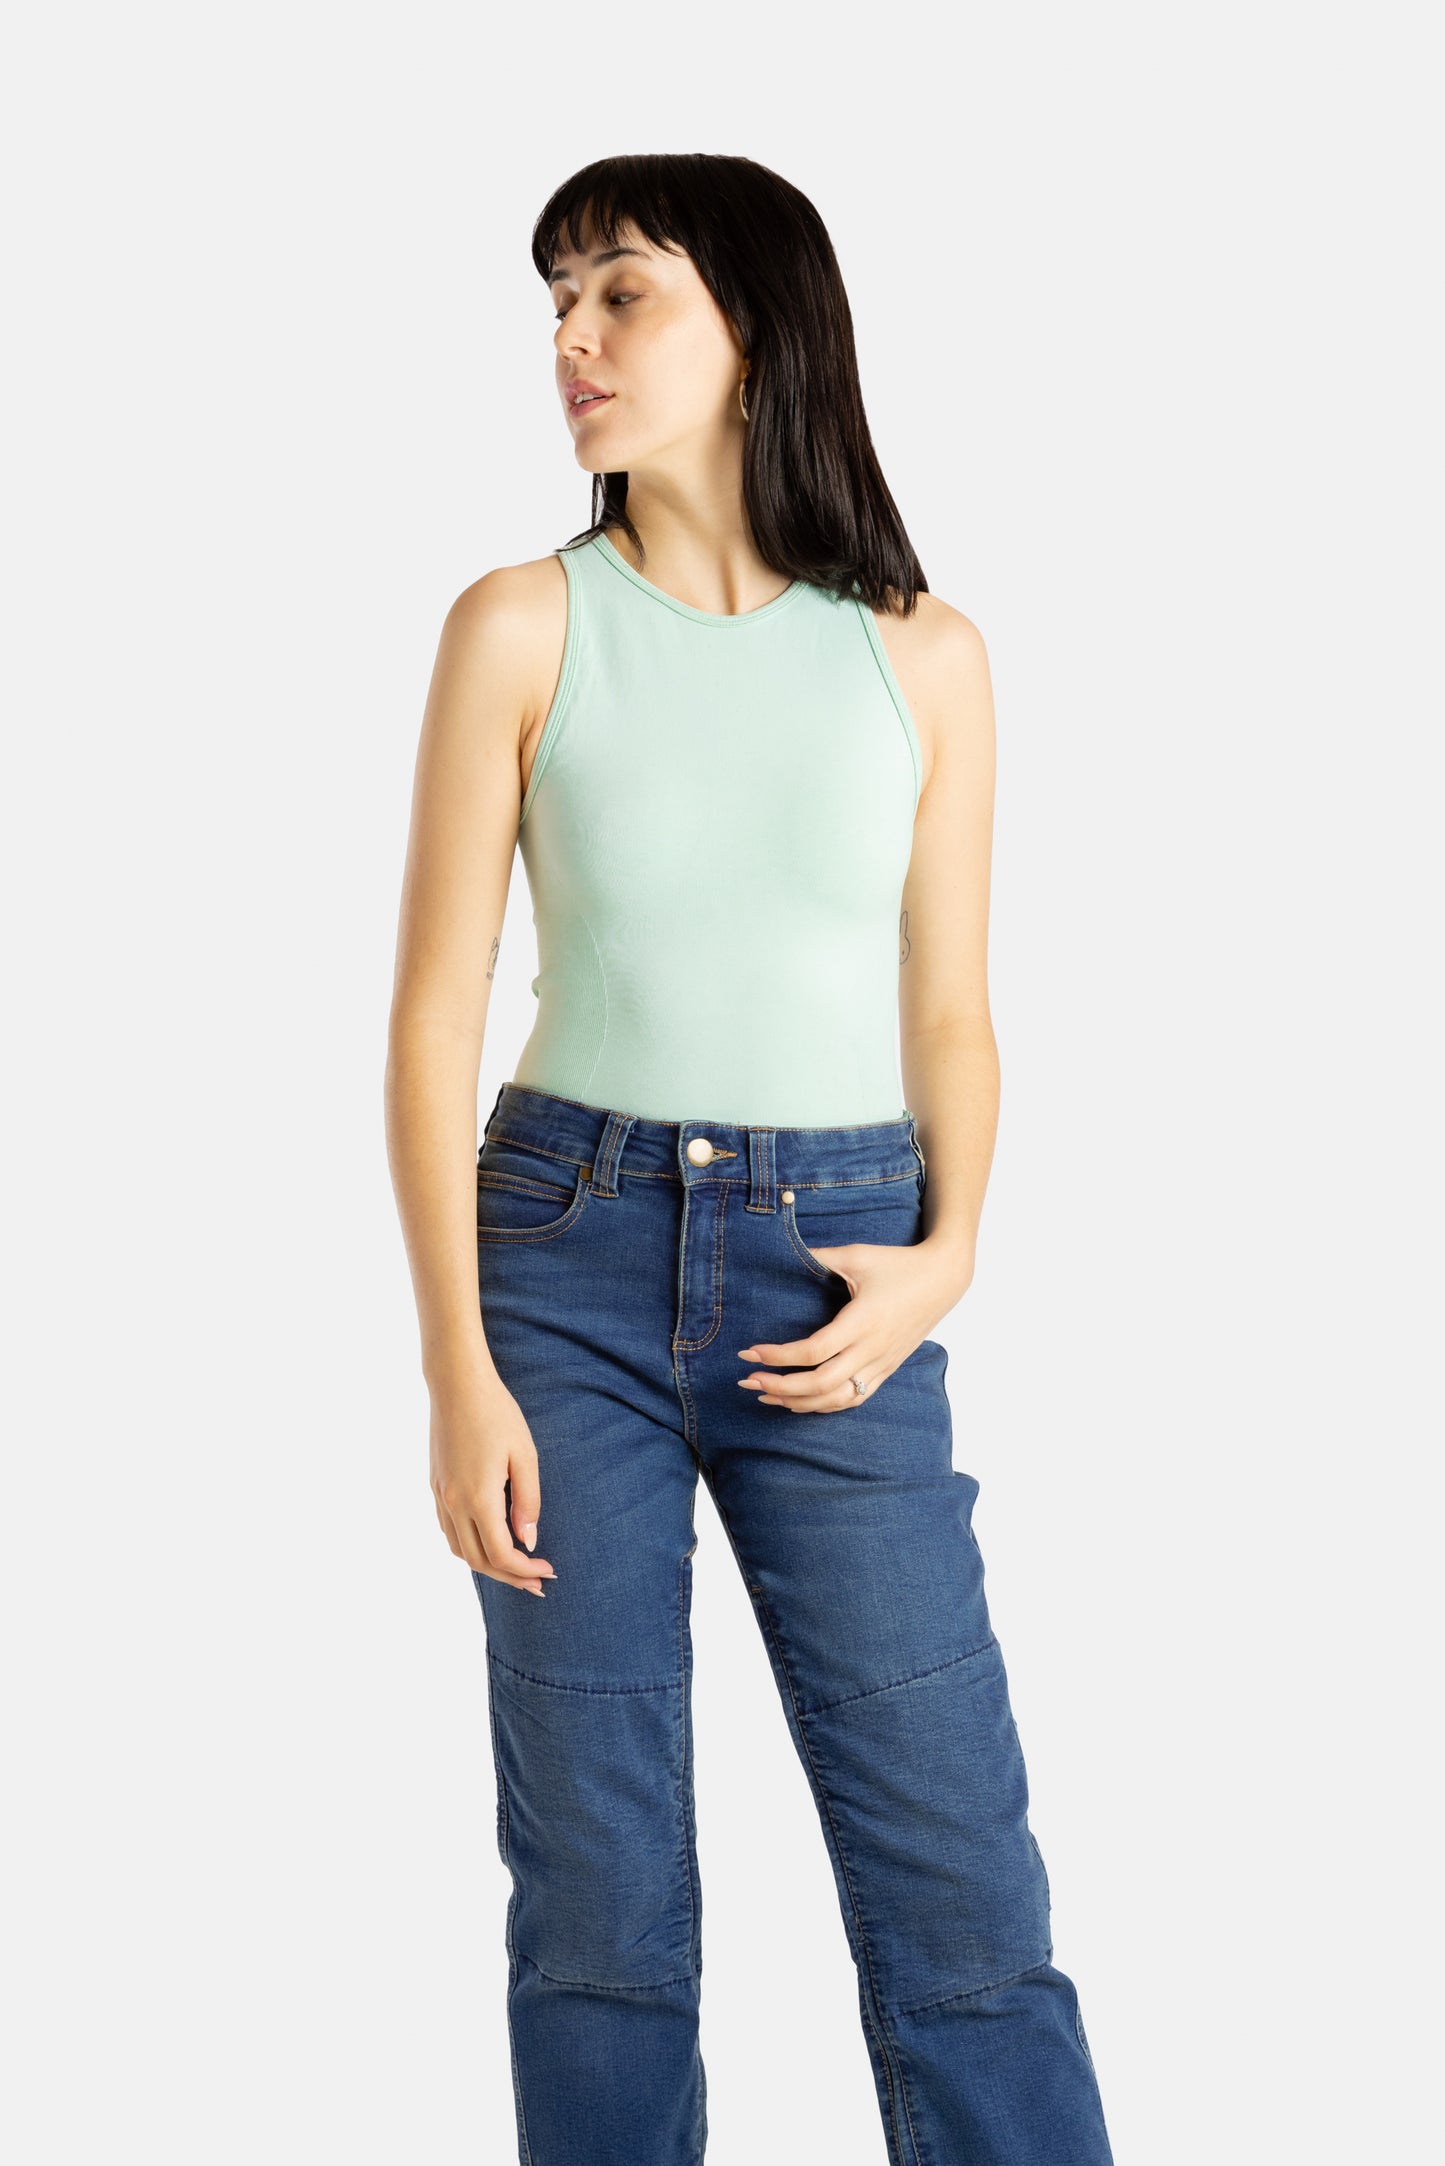 A white woman with long black hair and hoop earrings wears a sea form (Very light green) tank top and denim jeans.